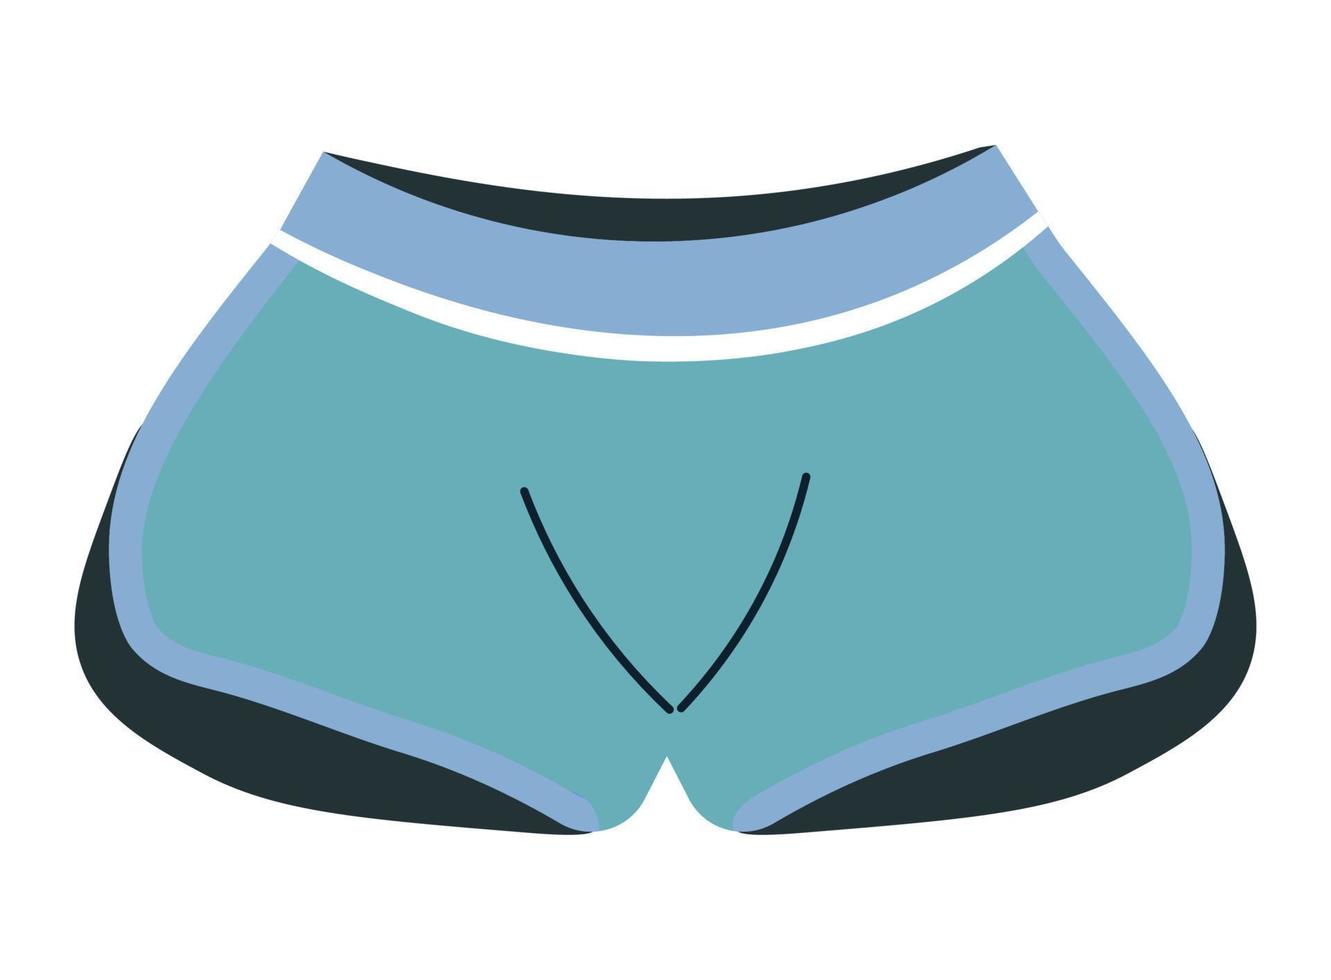 Women sports shorts, clothes and apparel vector